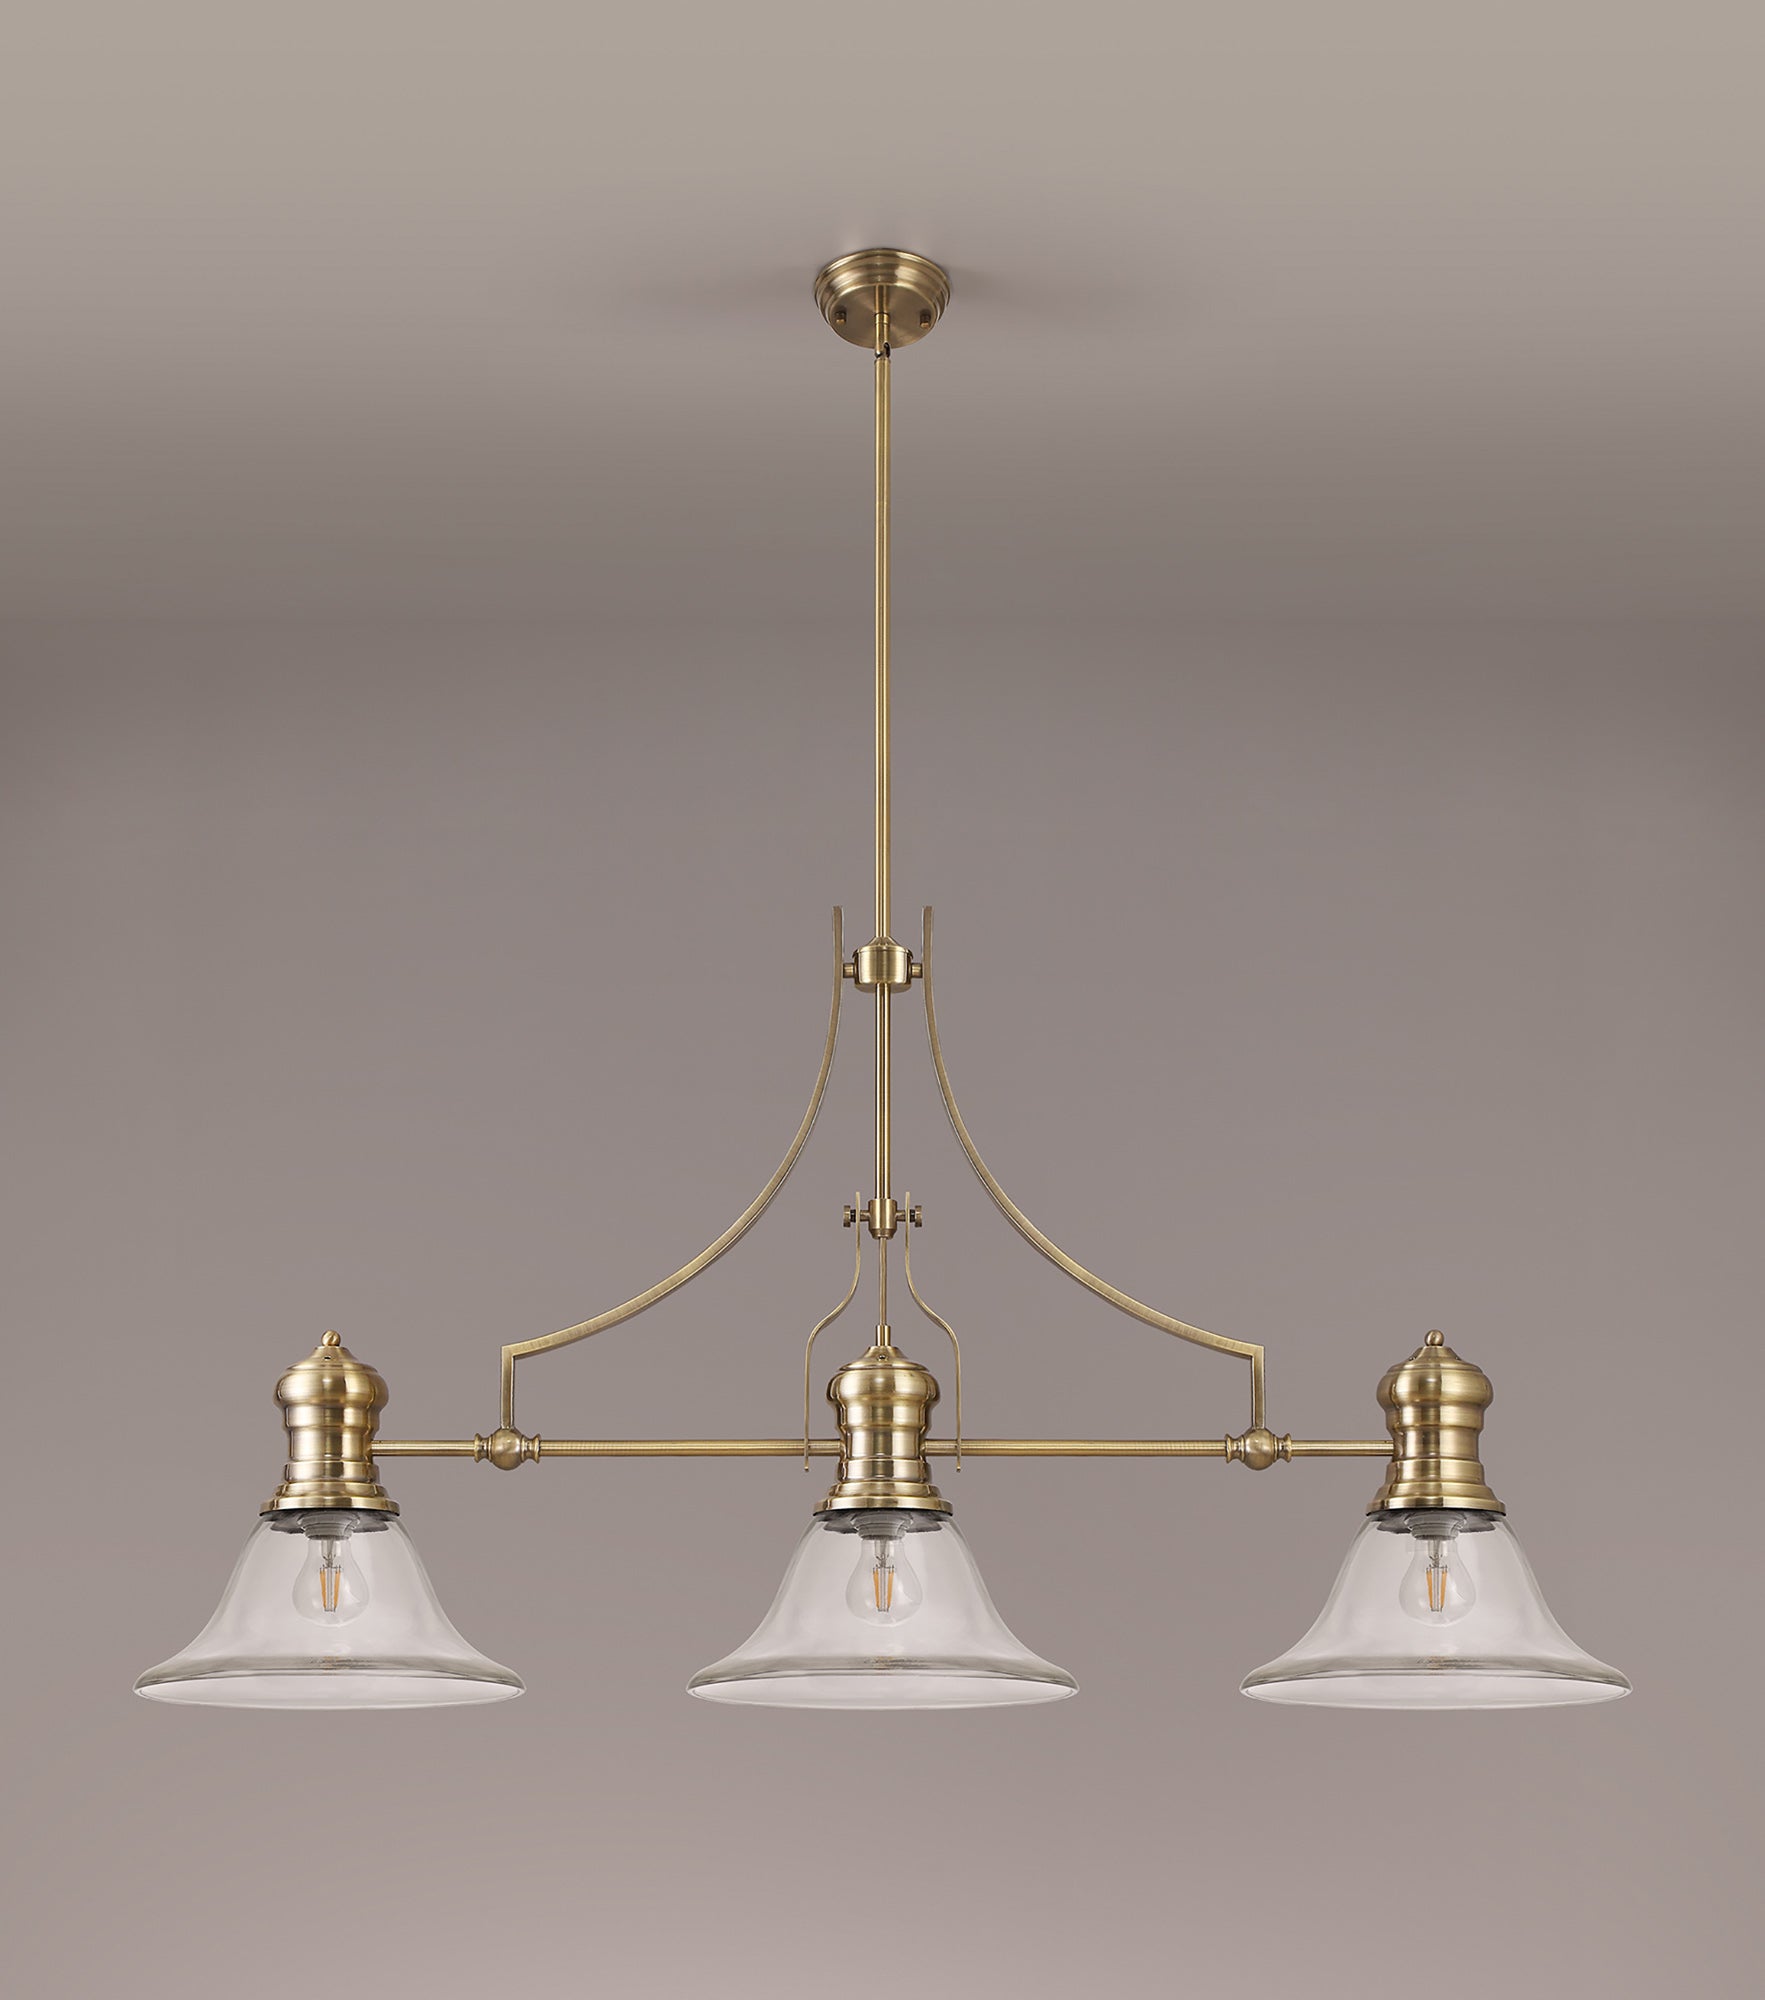 Docker 3 Light Linear Pendant E27 With 30cm Smooth Bell Glass Shade, Antique Brass, Clear